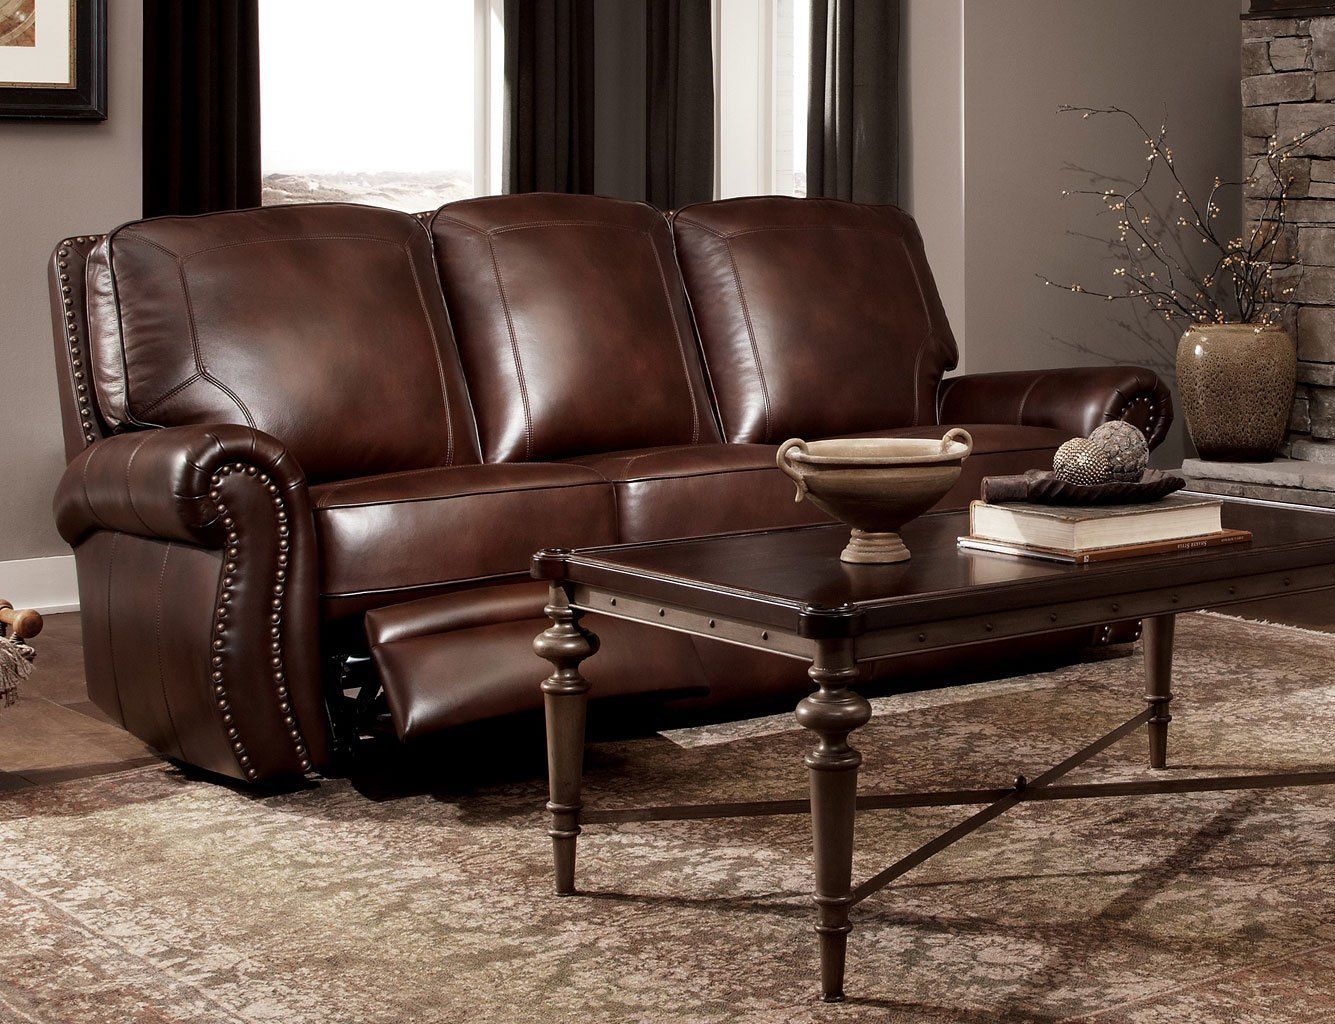 Carress 07 Power Reclining Sofa Craftmaster | Furniture Cart For Raven Power Reclining Sofas (View 5 of 15)